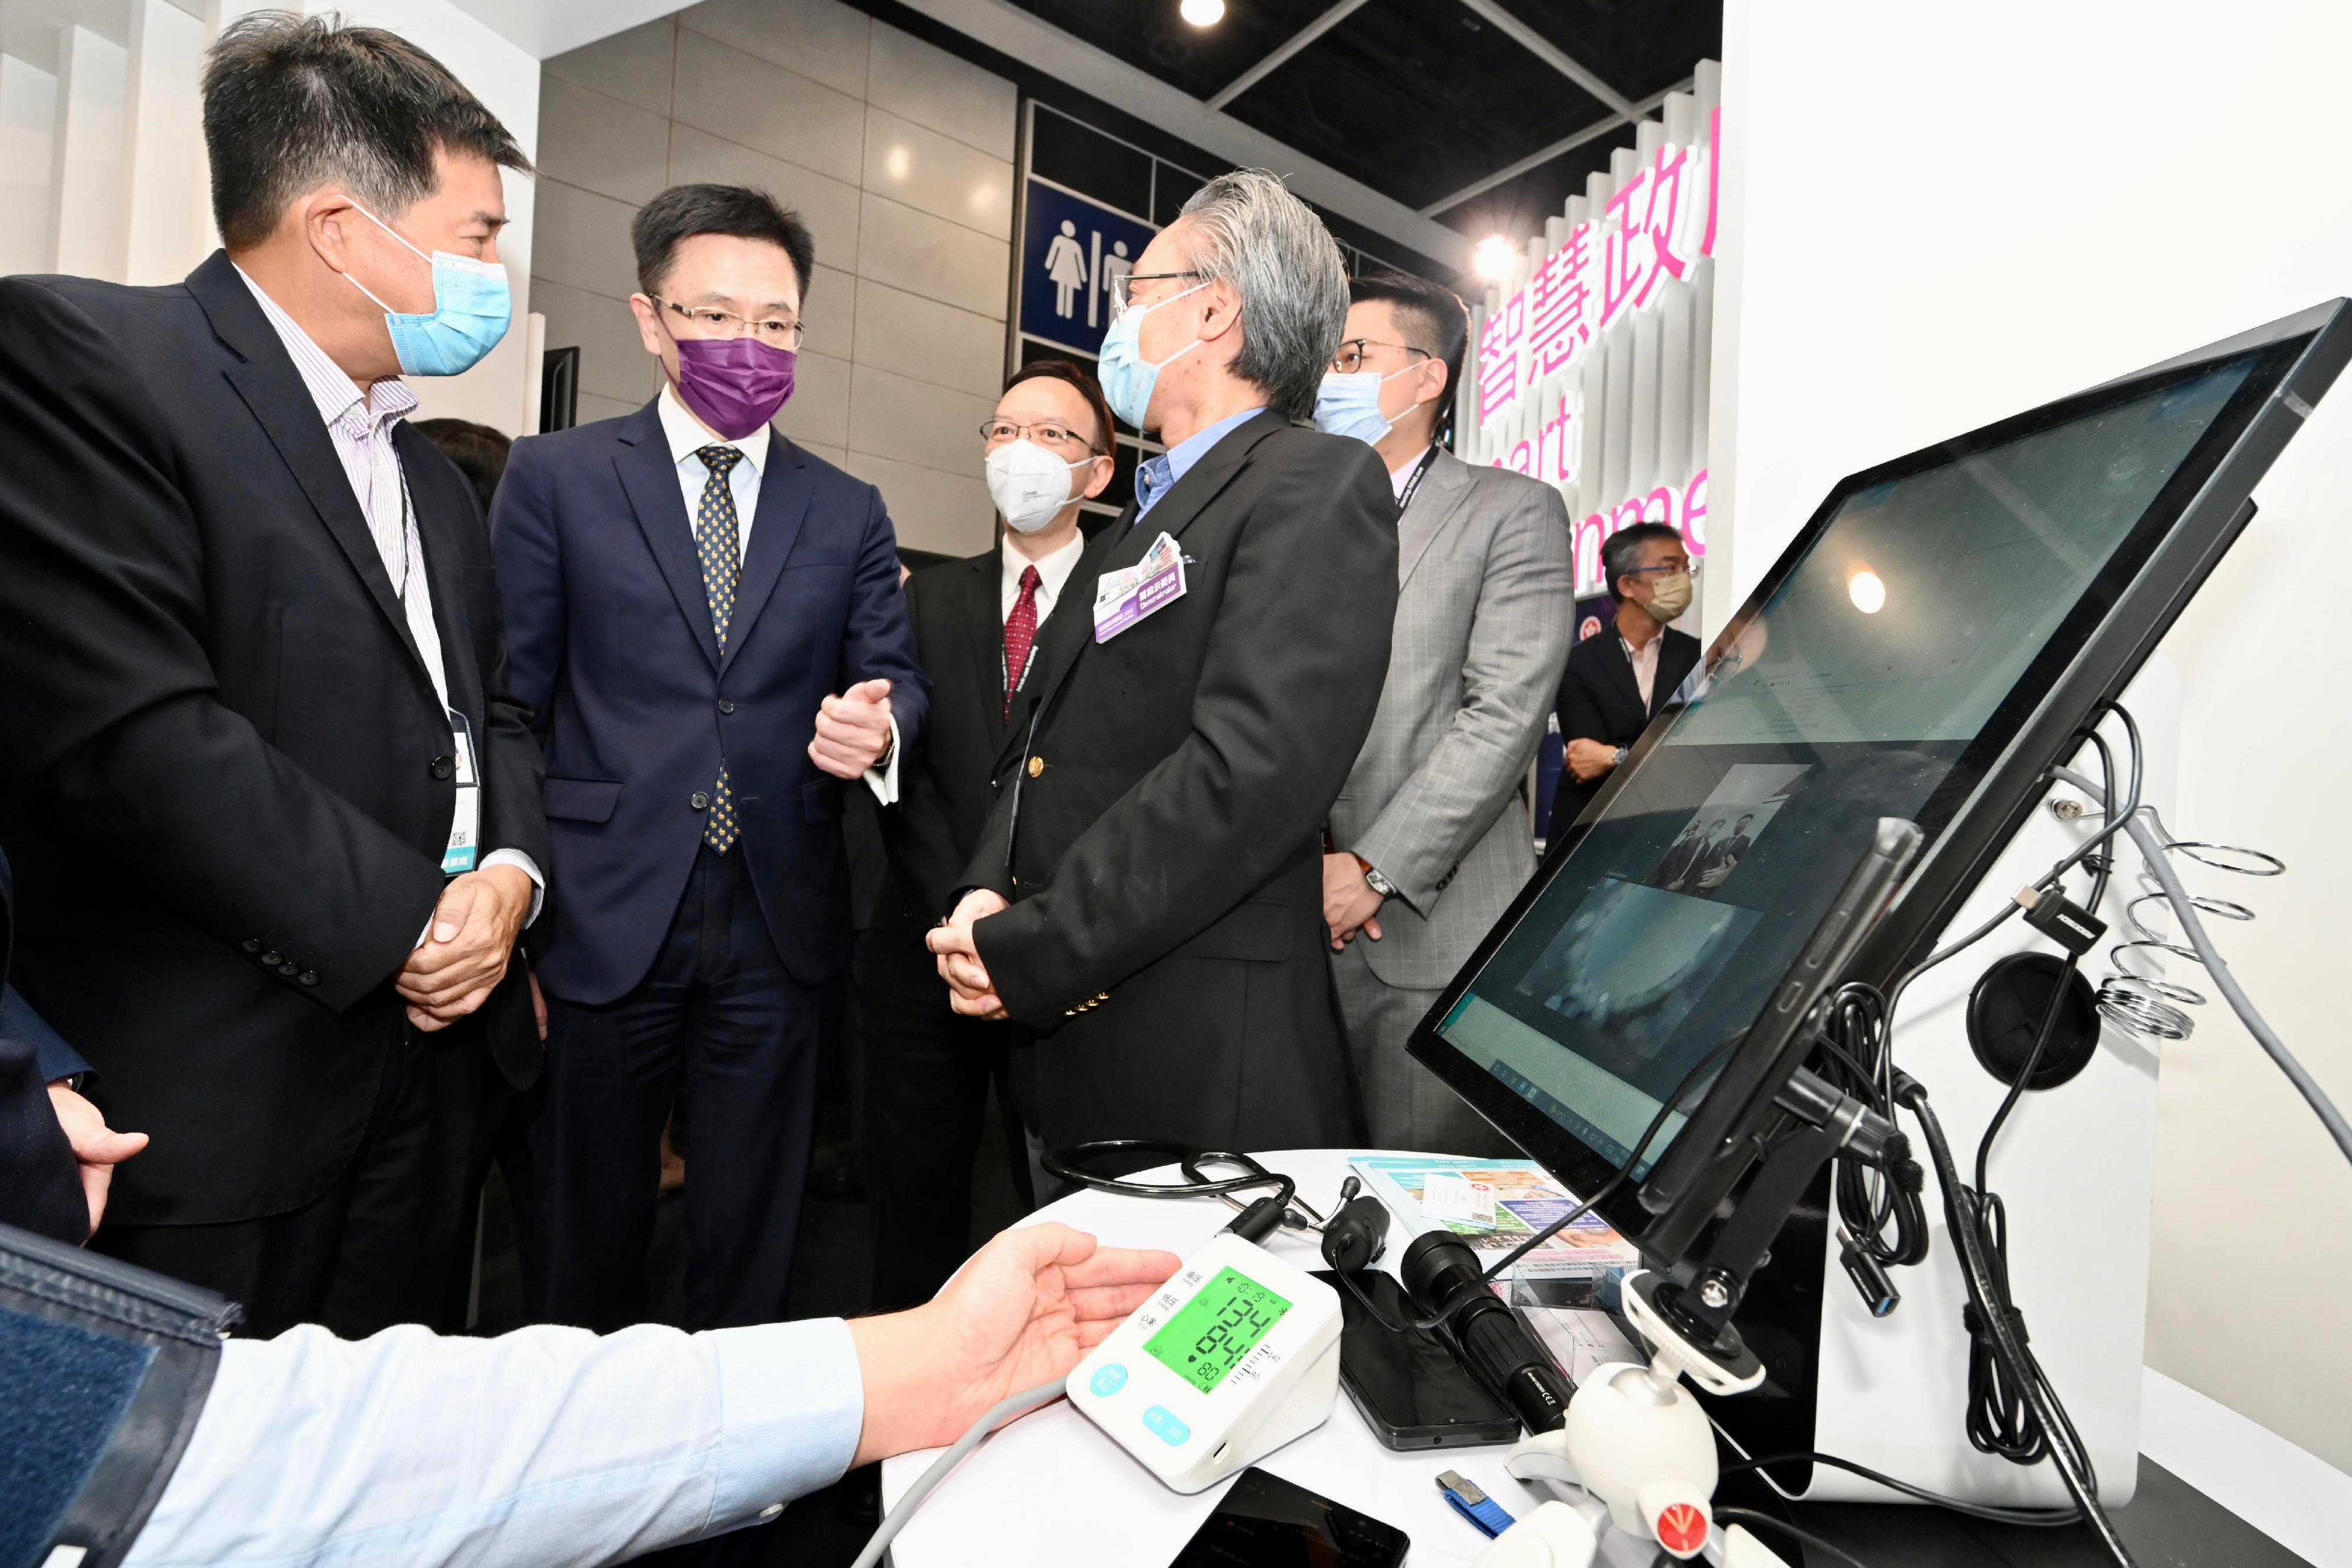 The Secretary for Innovation, Technology and Industry, Professor Sun Dong (second left), visits the Smart Government Pavilion at the International ICT Expo today (October 13) and is briefed on the Telehealth Booth of Heung Yee Kuk.